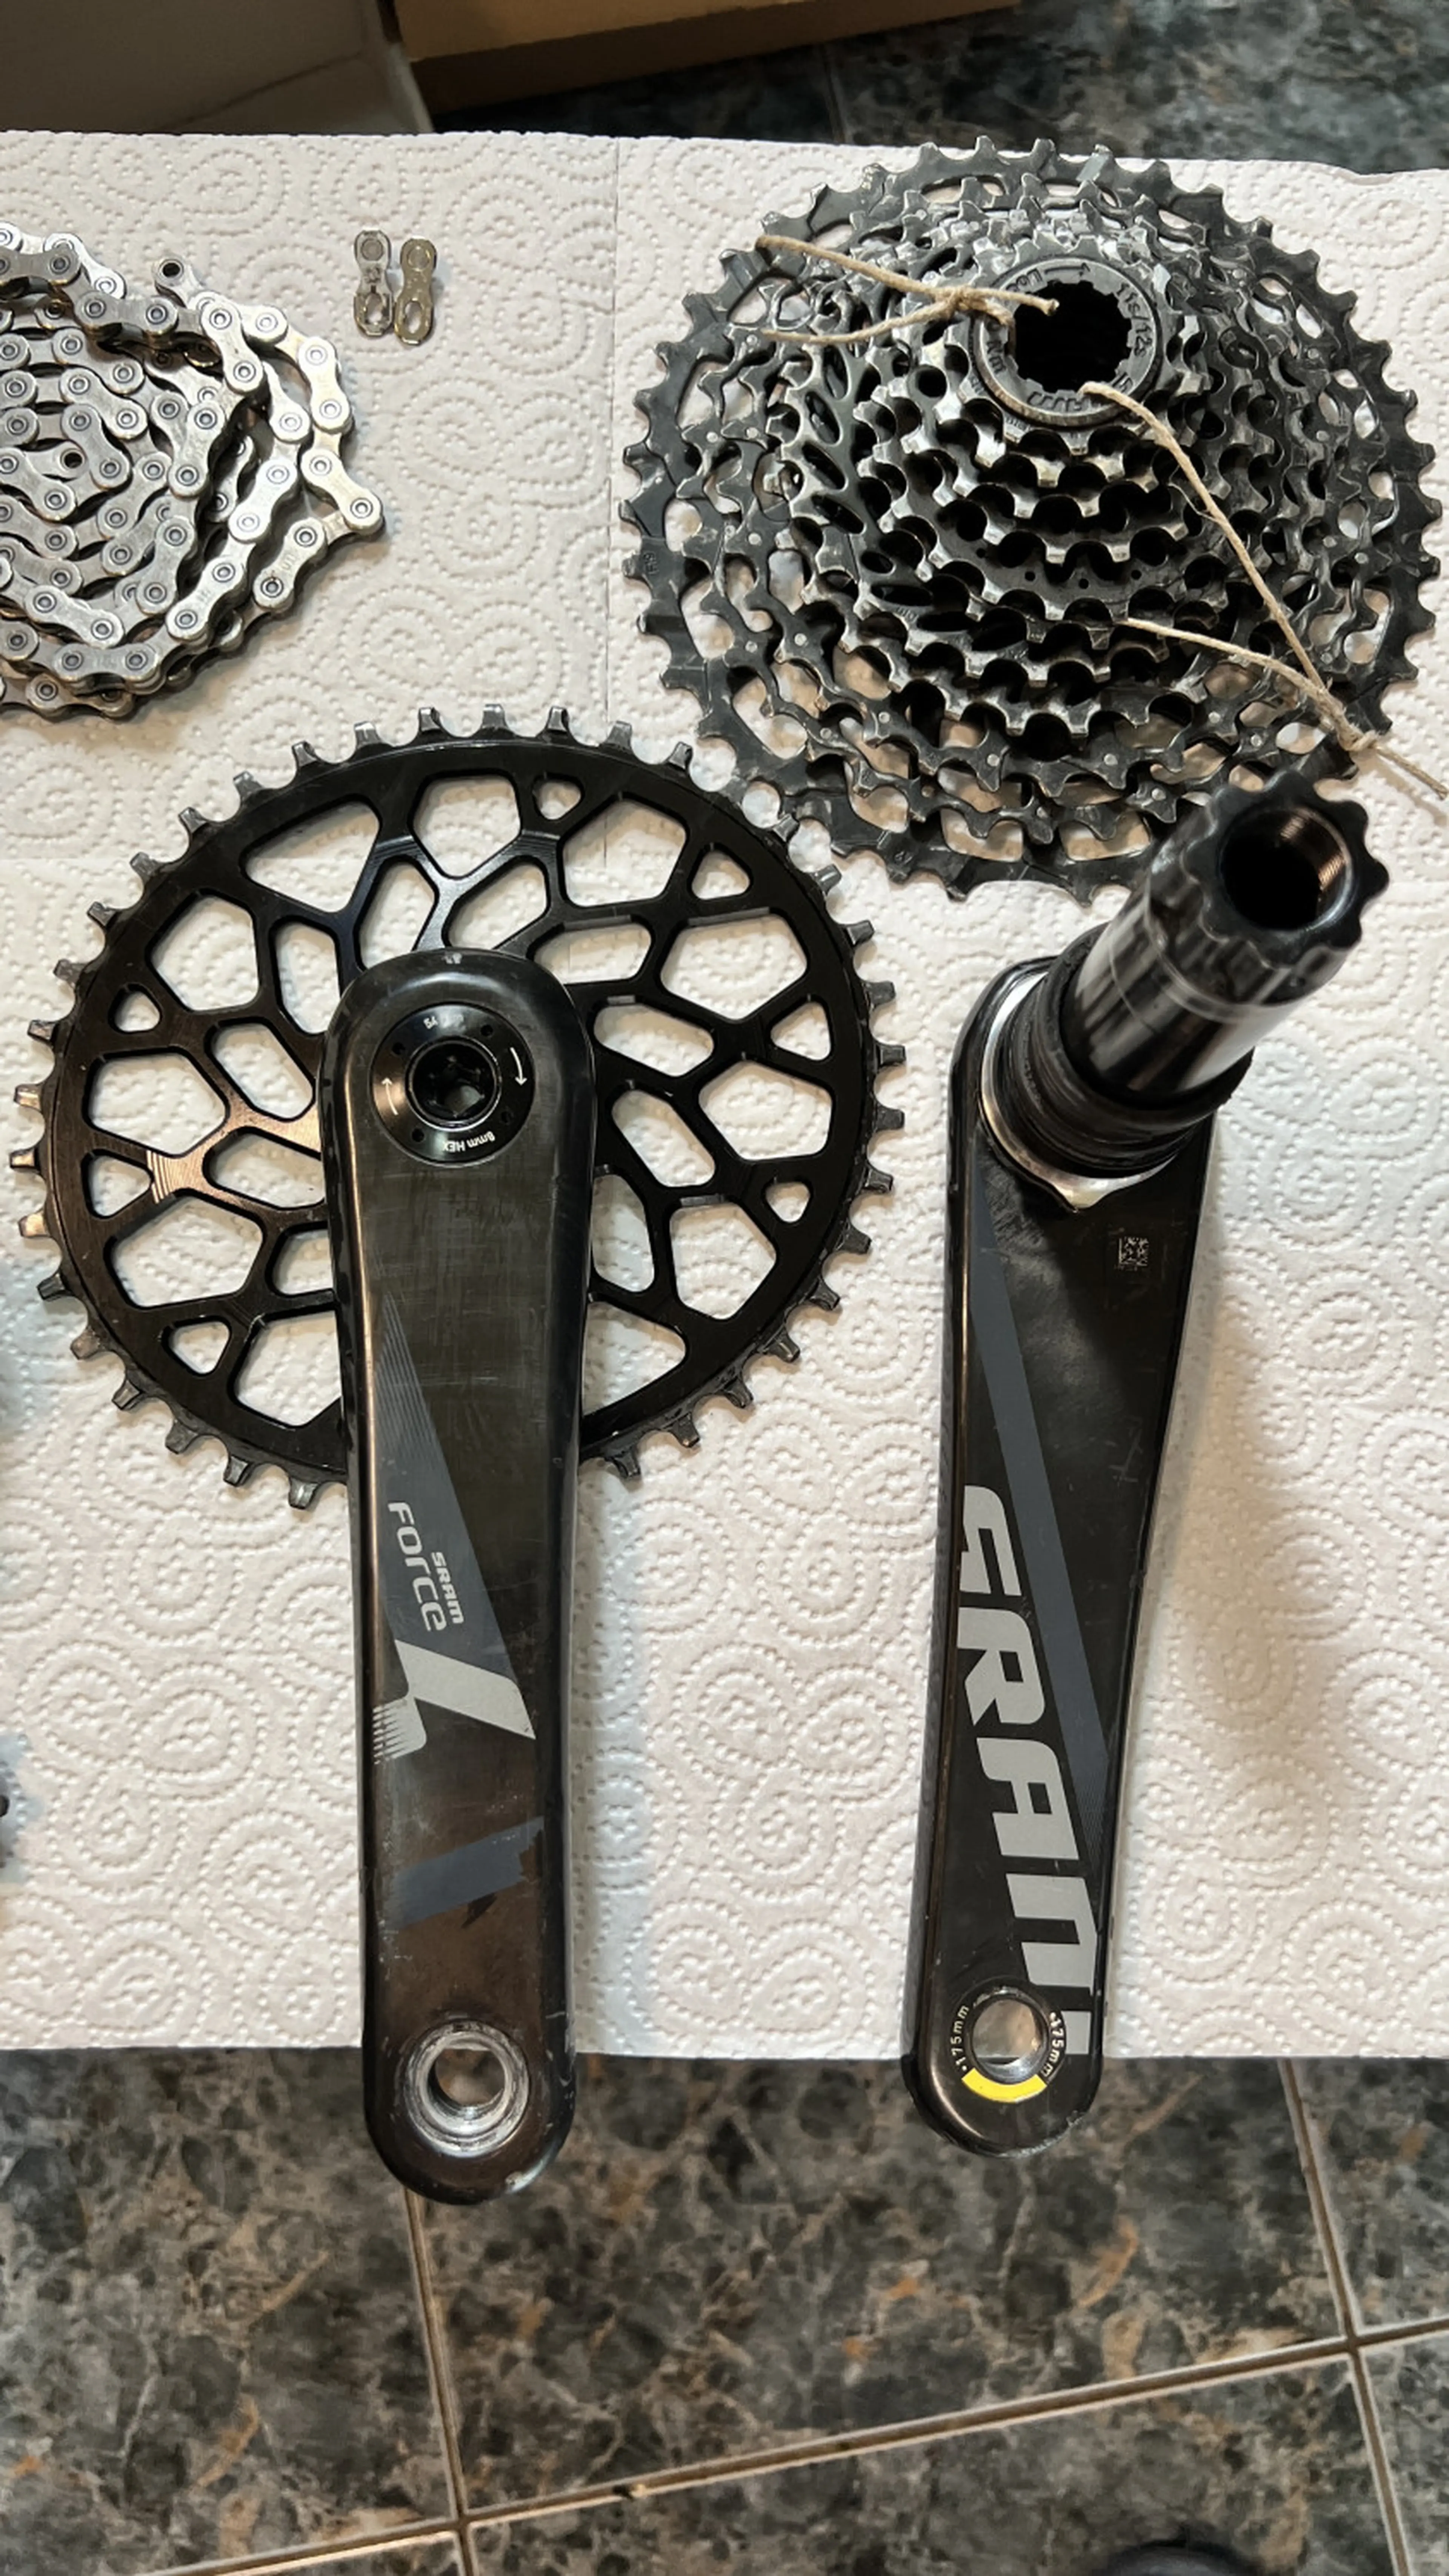 3. Groupset complet Sram Force CX1 1x11